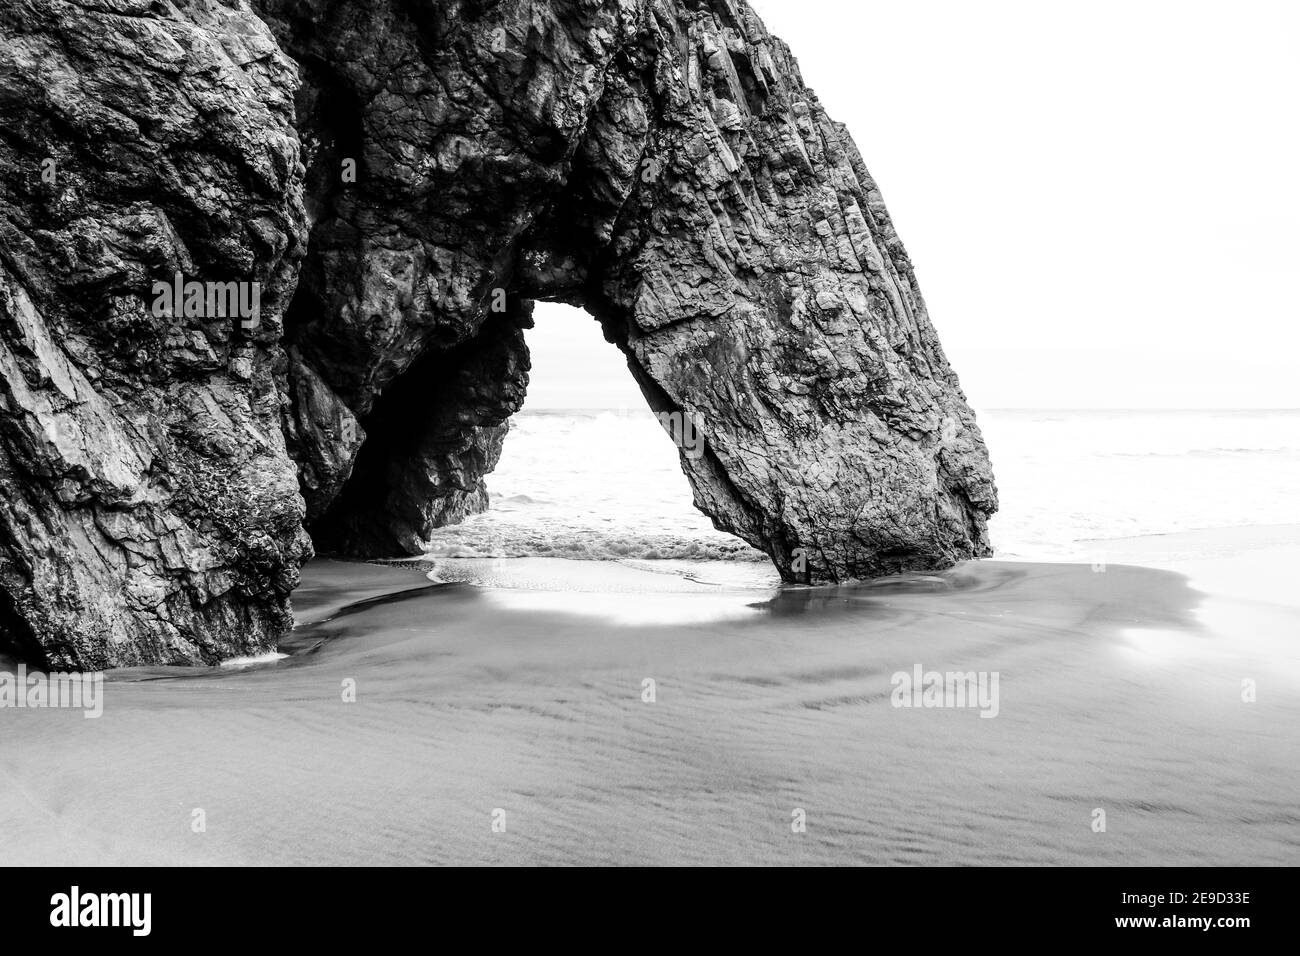 Beautiful stone natural arche. Rock formation in a beach with ocean in background. Stock Photo